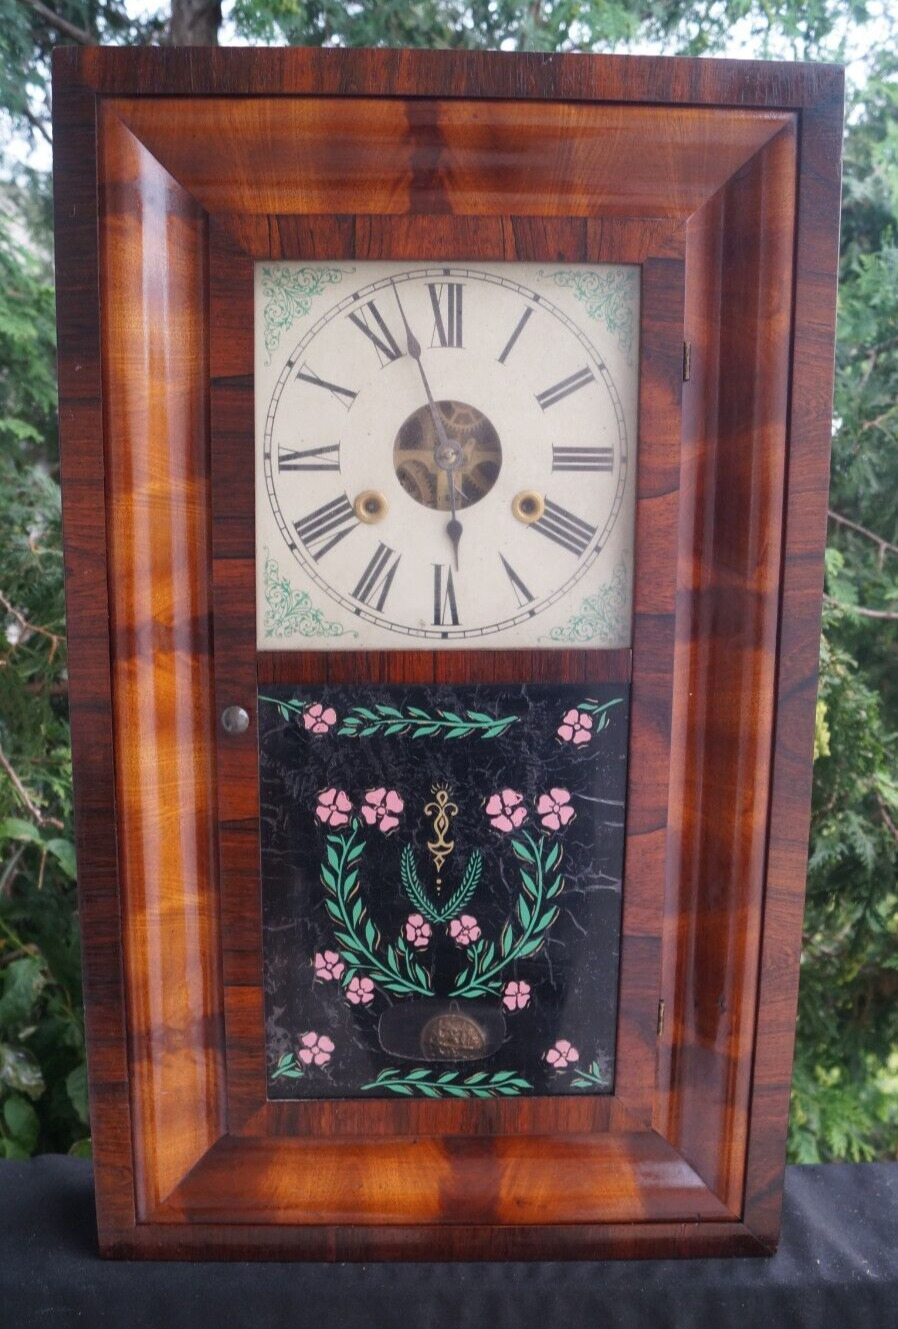 Antique 1850s - 1860s Seth Thomas OGEE Mantle Clock - VIDEO - BEAUTY - READ